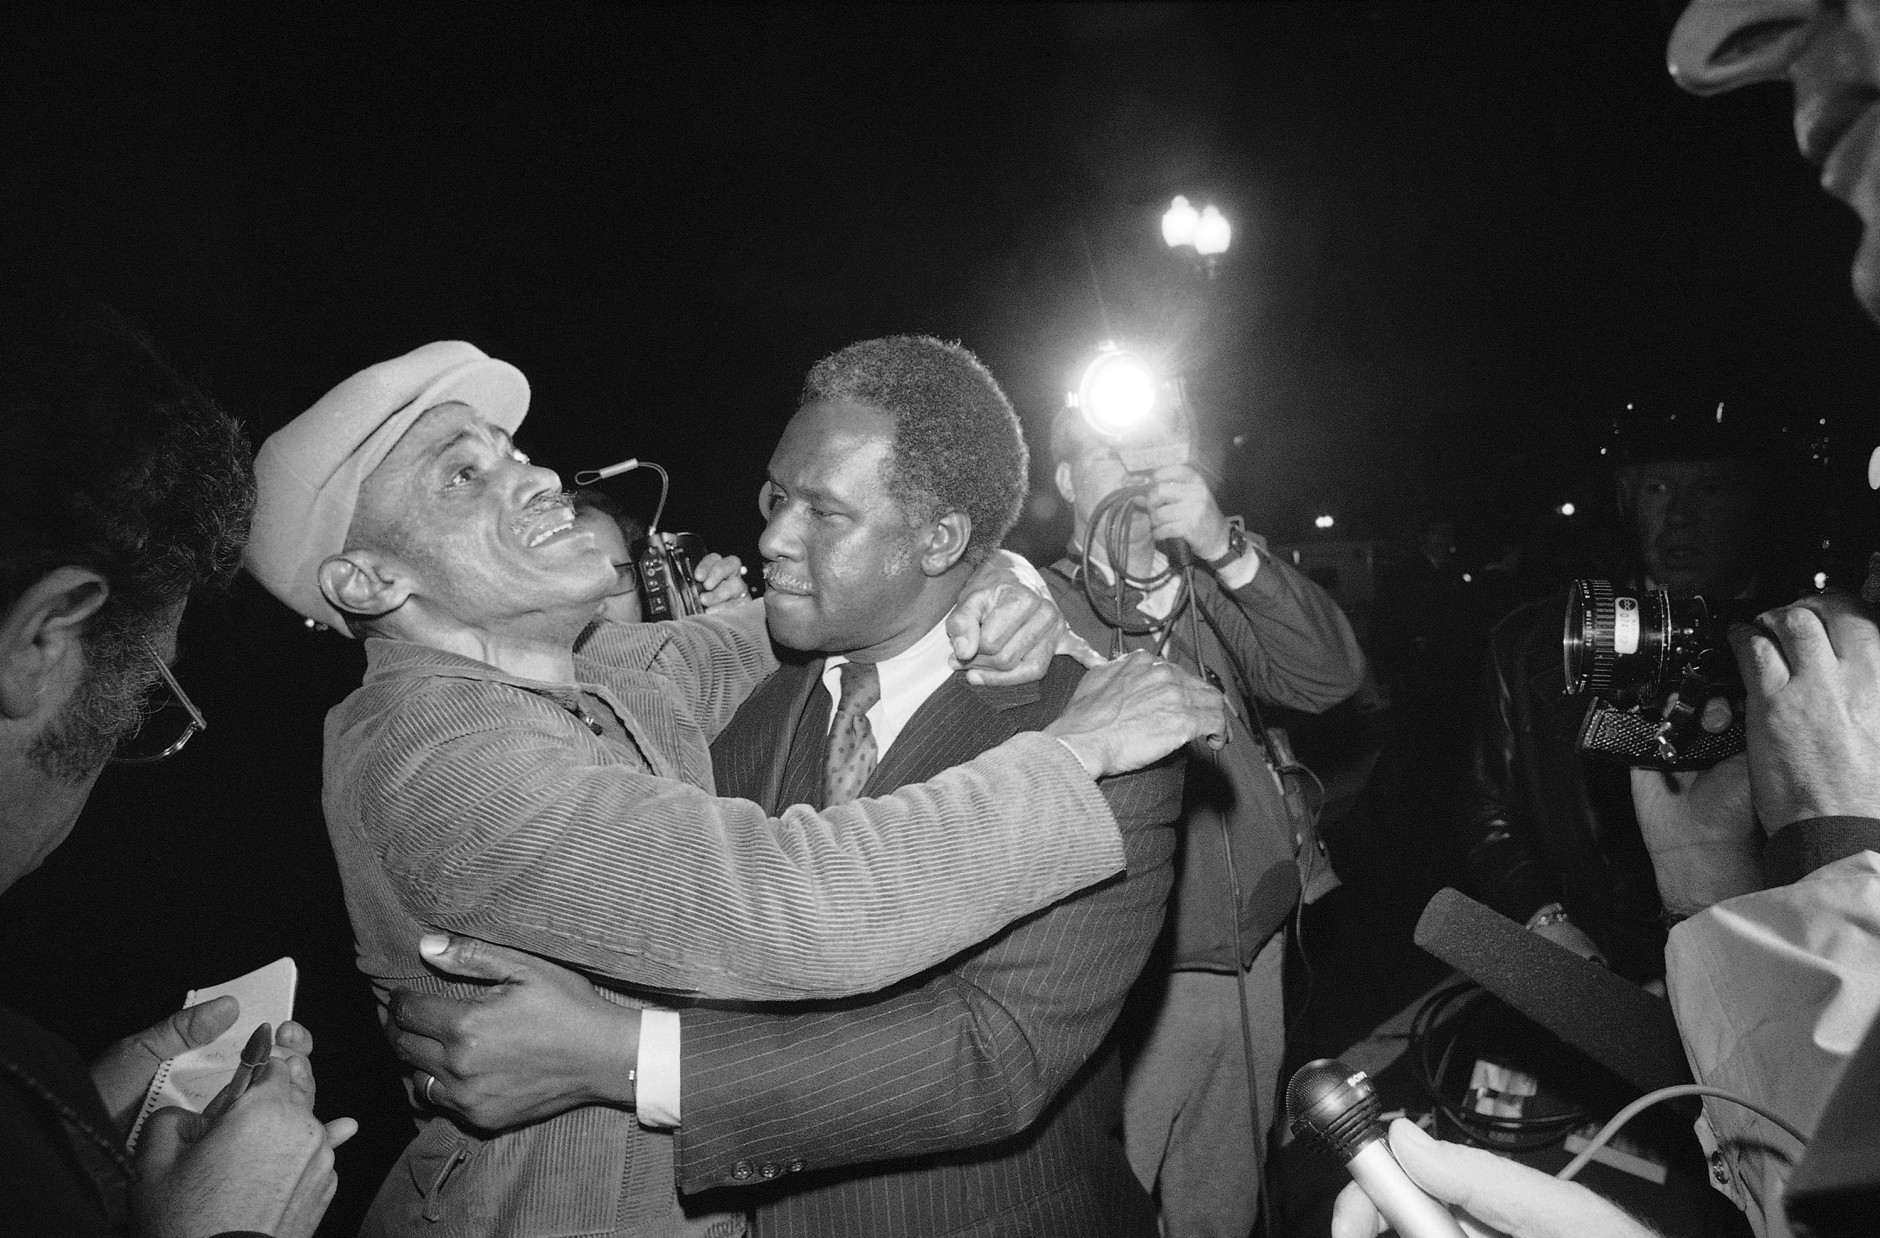 Joseph Yeldell, right, who formerly headed the Districts Department of Human Resources, embraces an unidentified man at the District of Columbia Building in Washington on Friday, March 11, 1977 after the man was released by terrorists who had held a group in the building since Wednesday. (AP Photo)